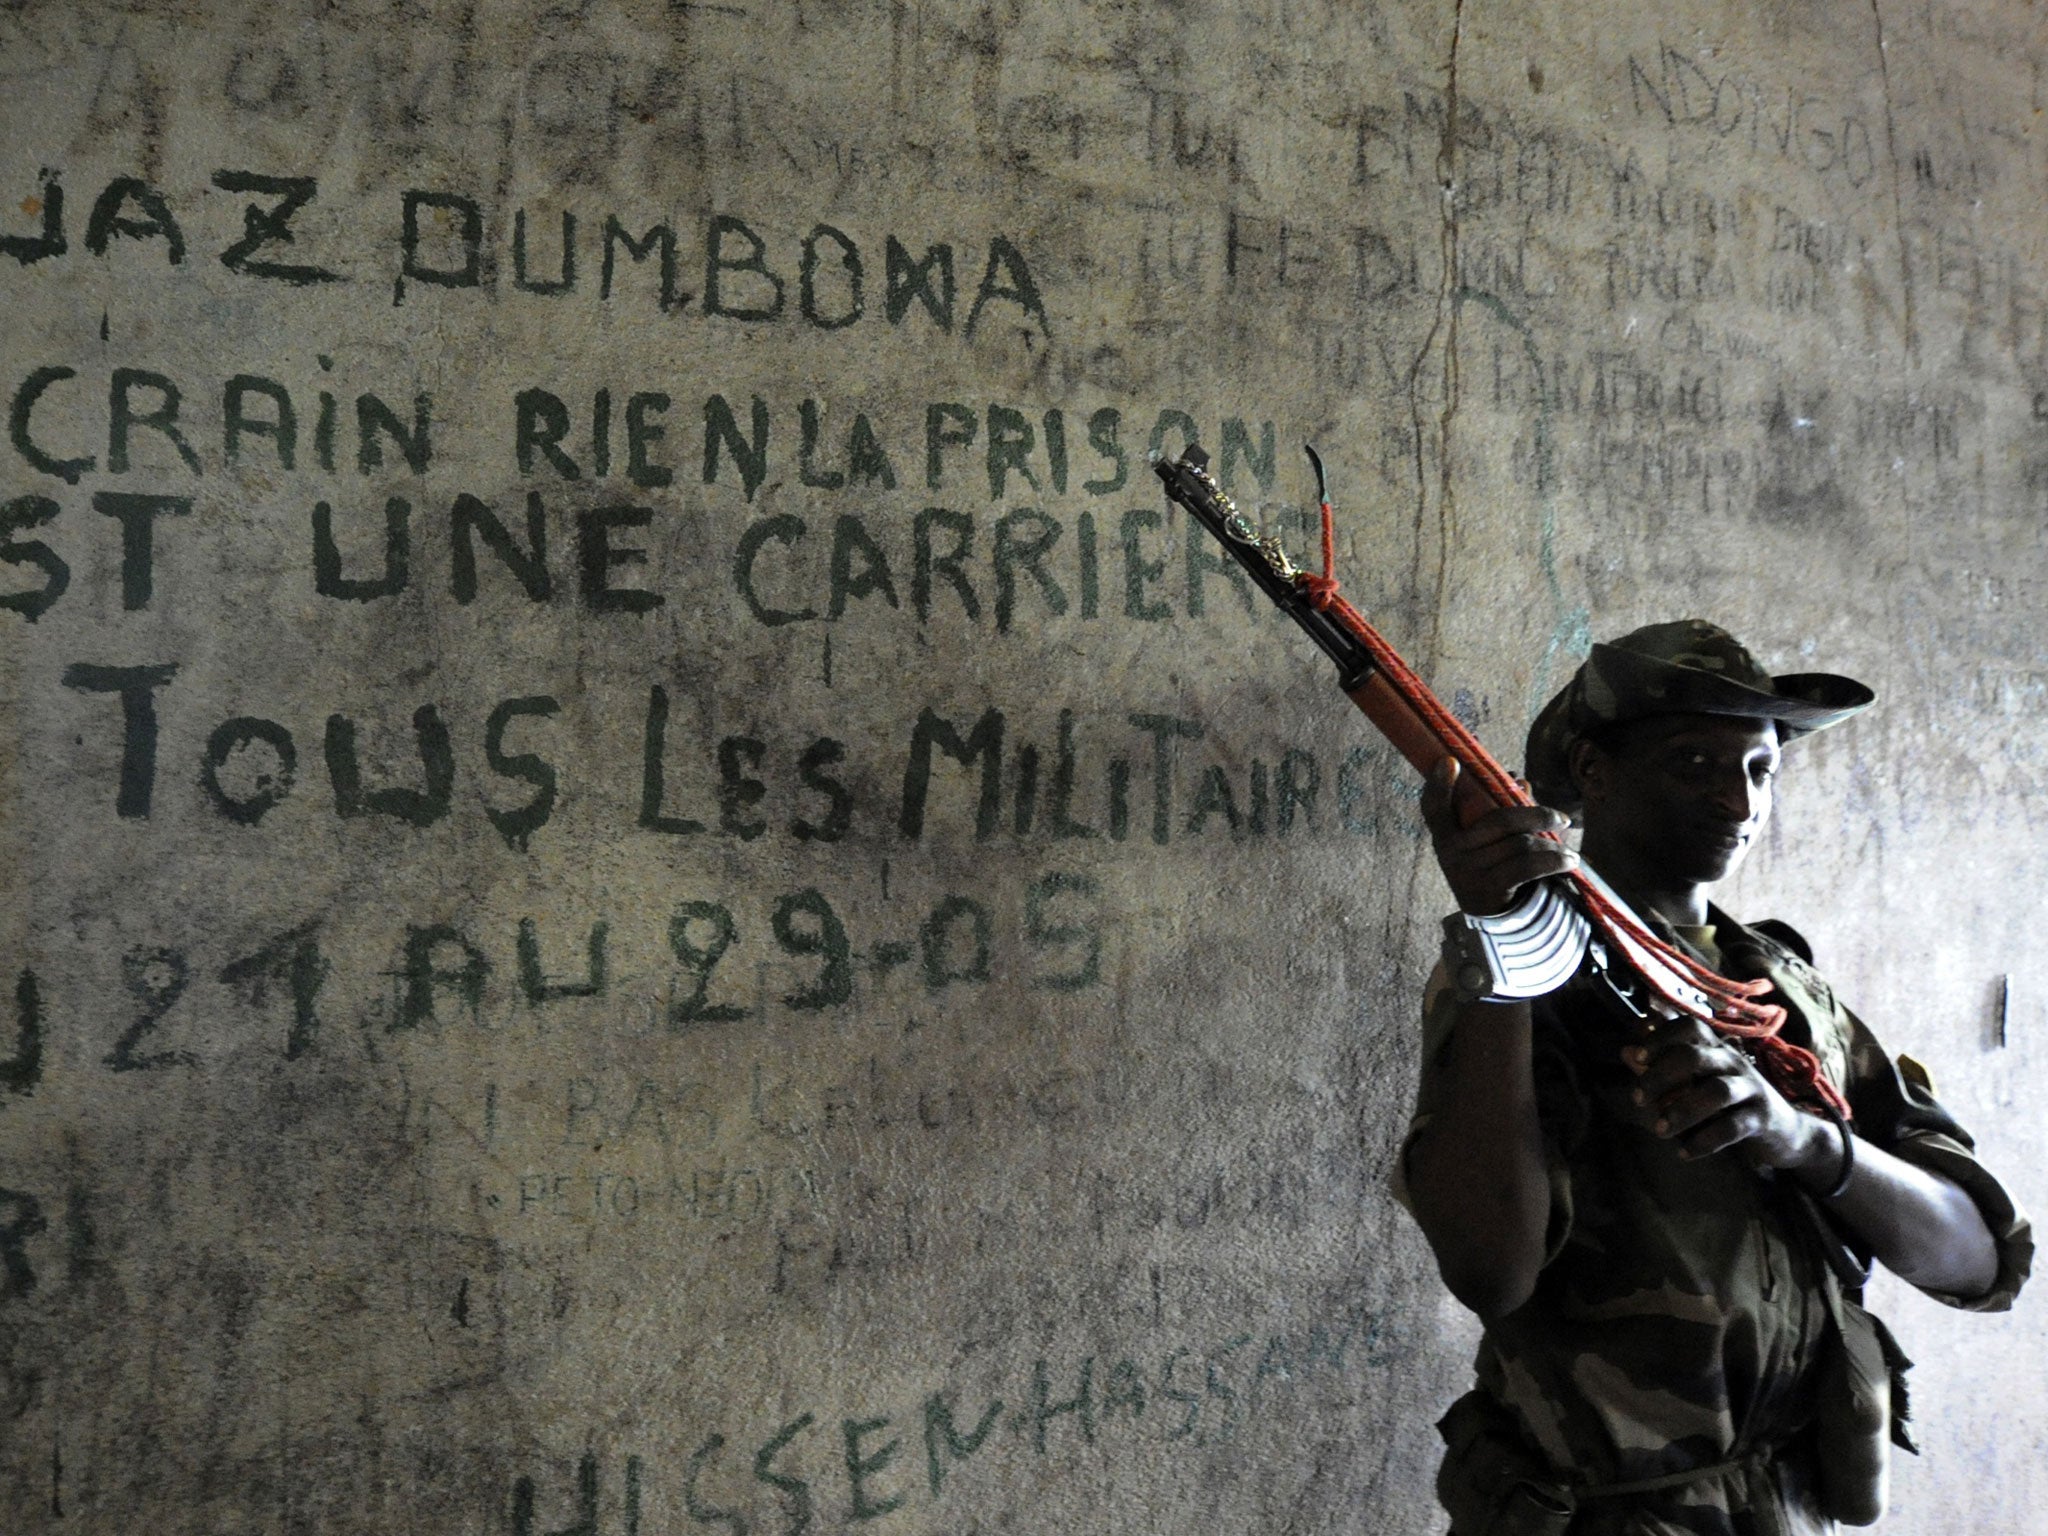 A rebel fighter guards a prison cell in Bangui